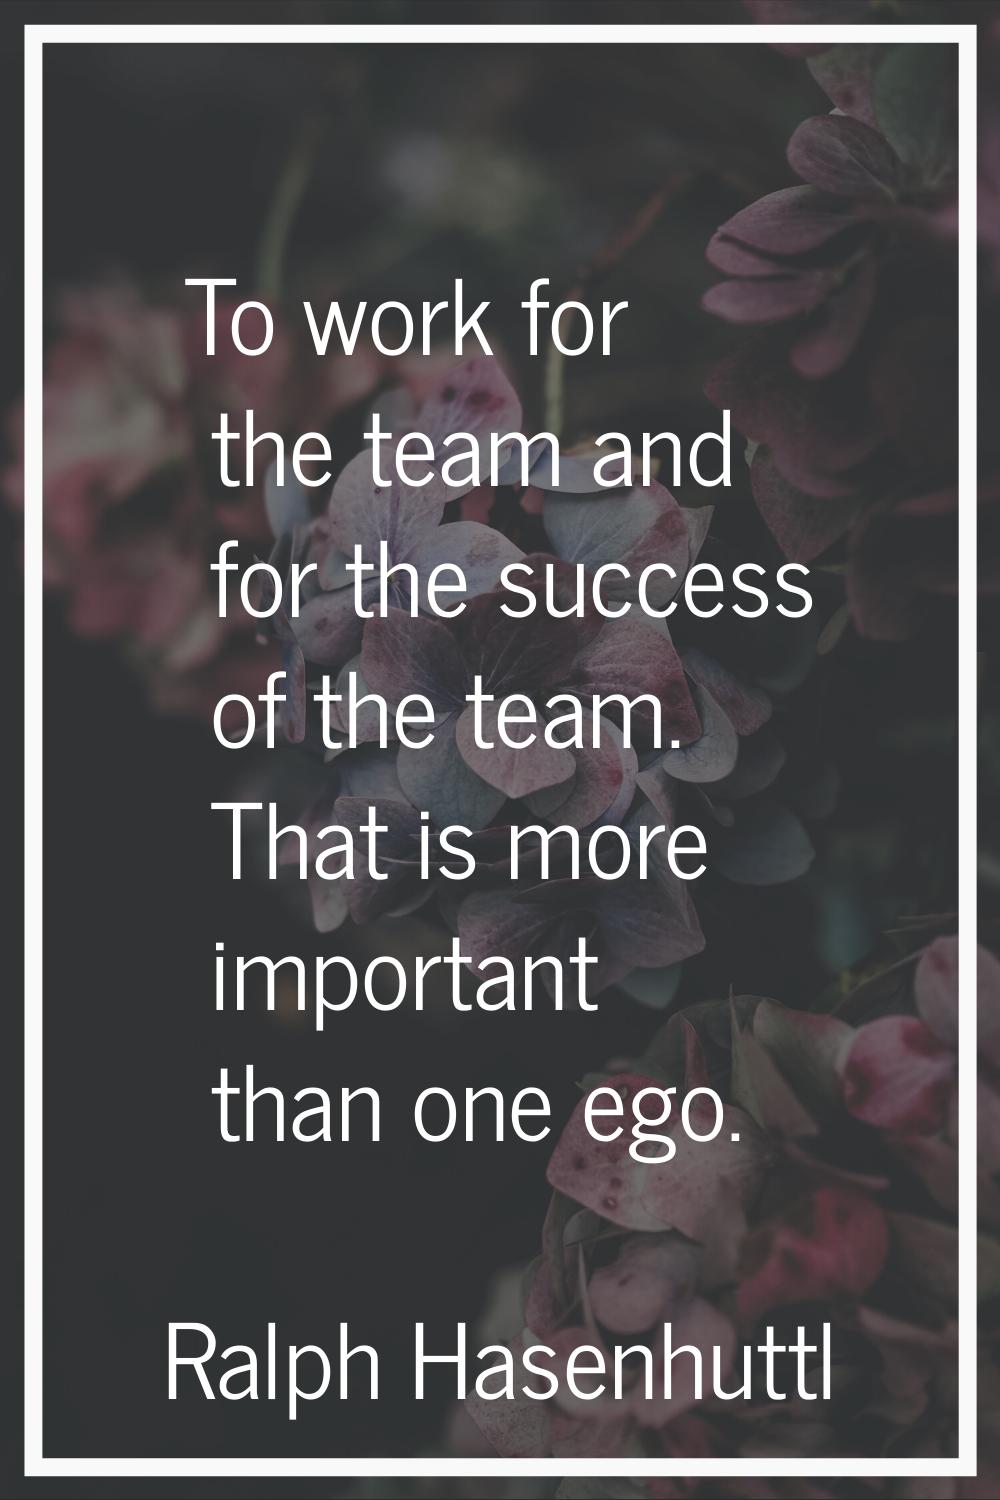 To work for the team and for the success of the team. That is more important than one ego.